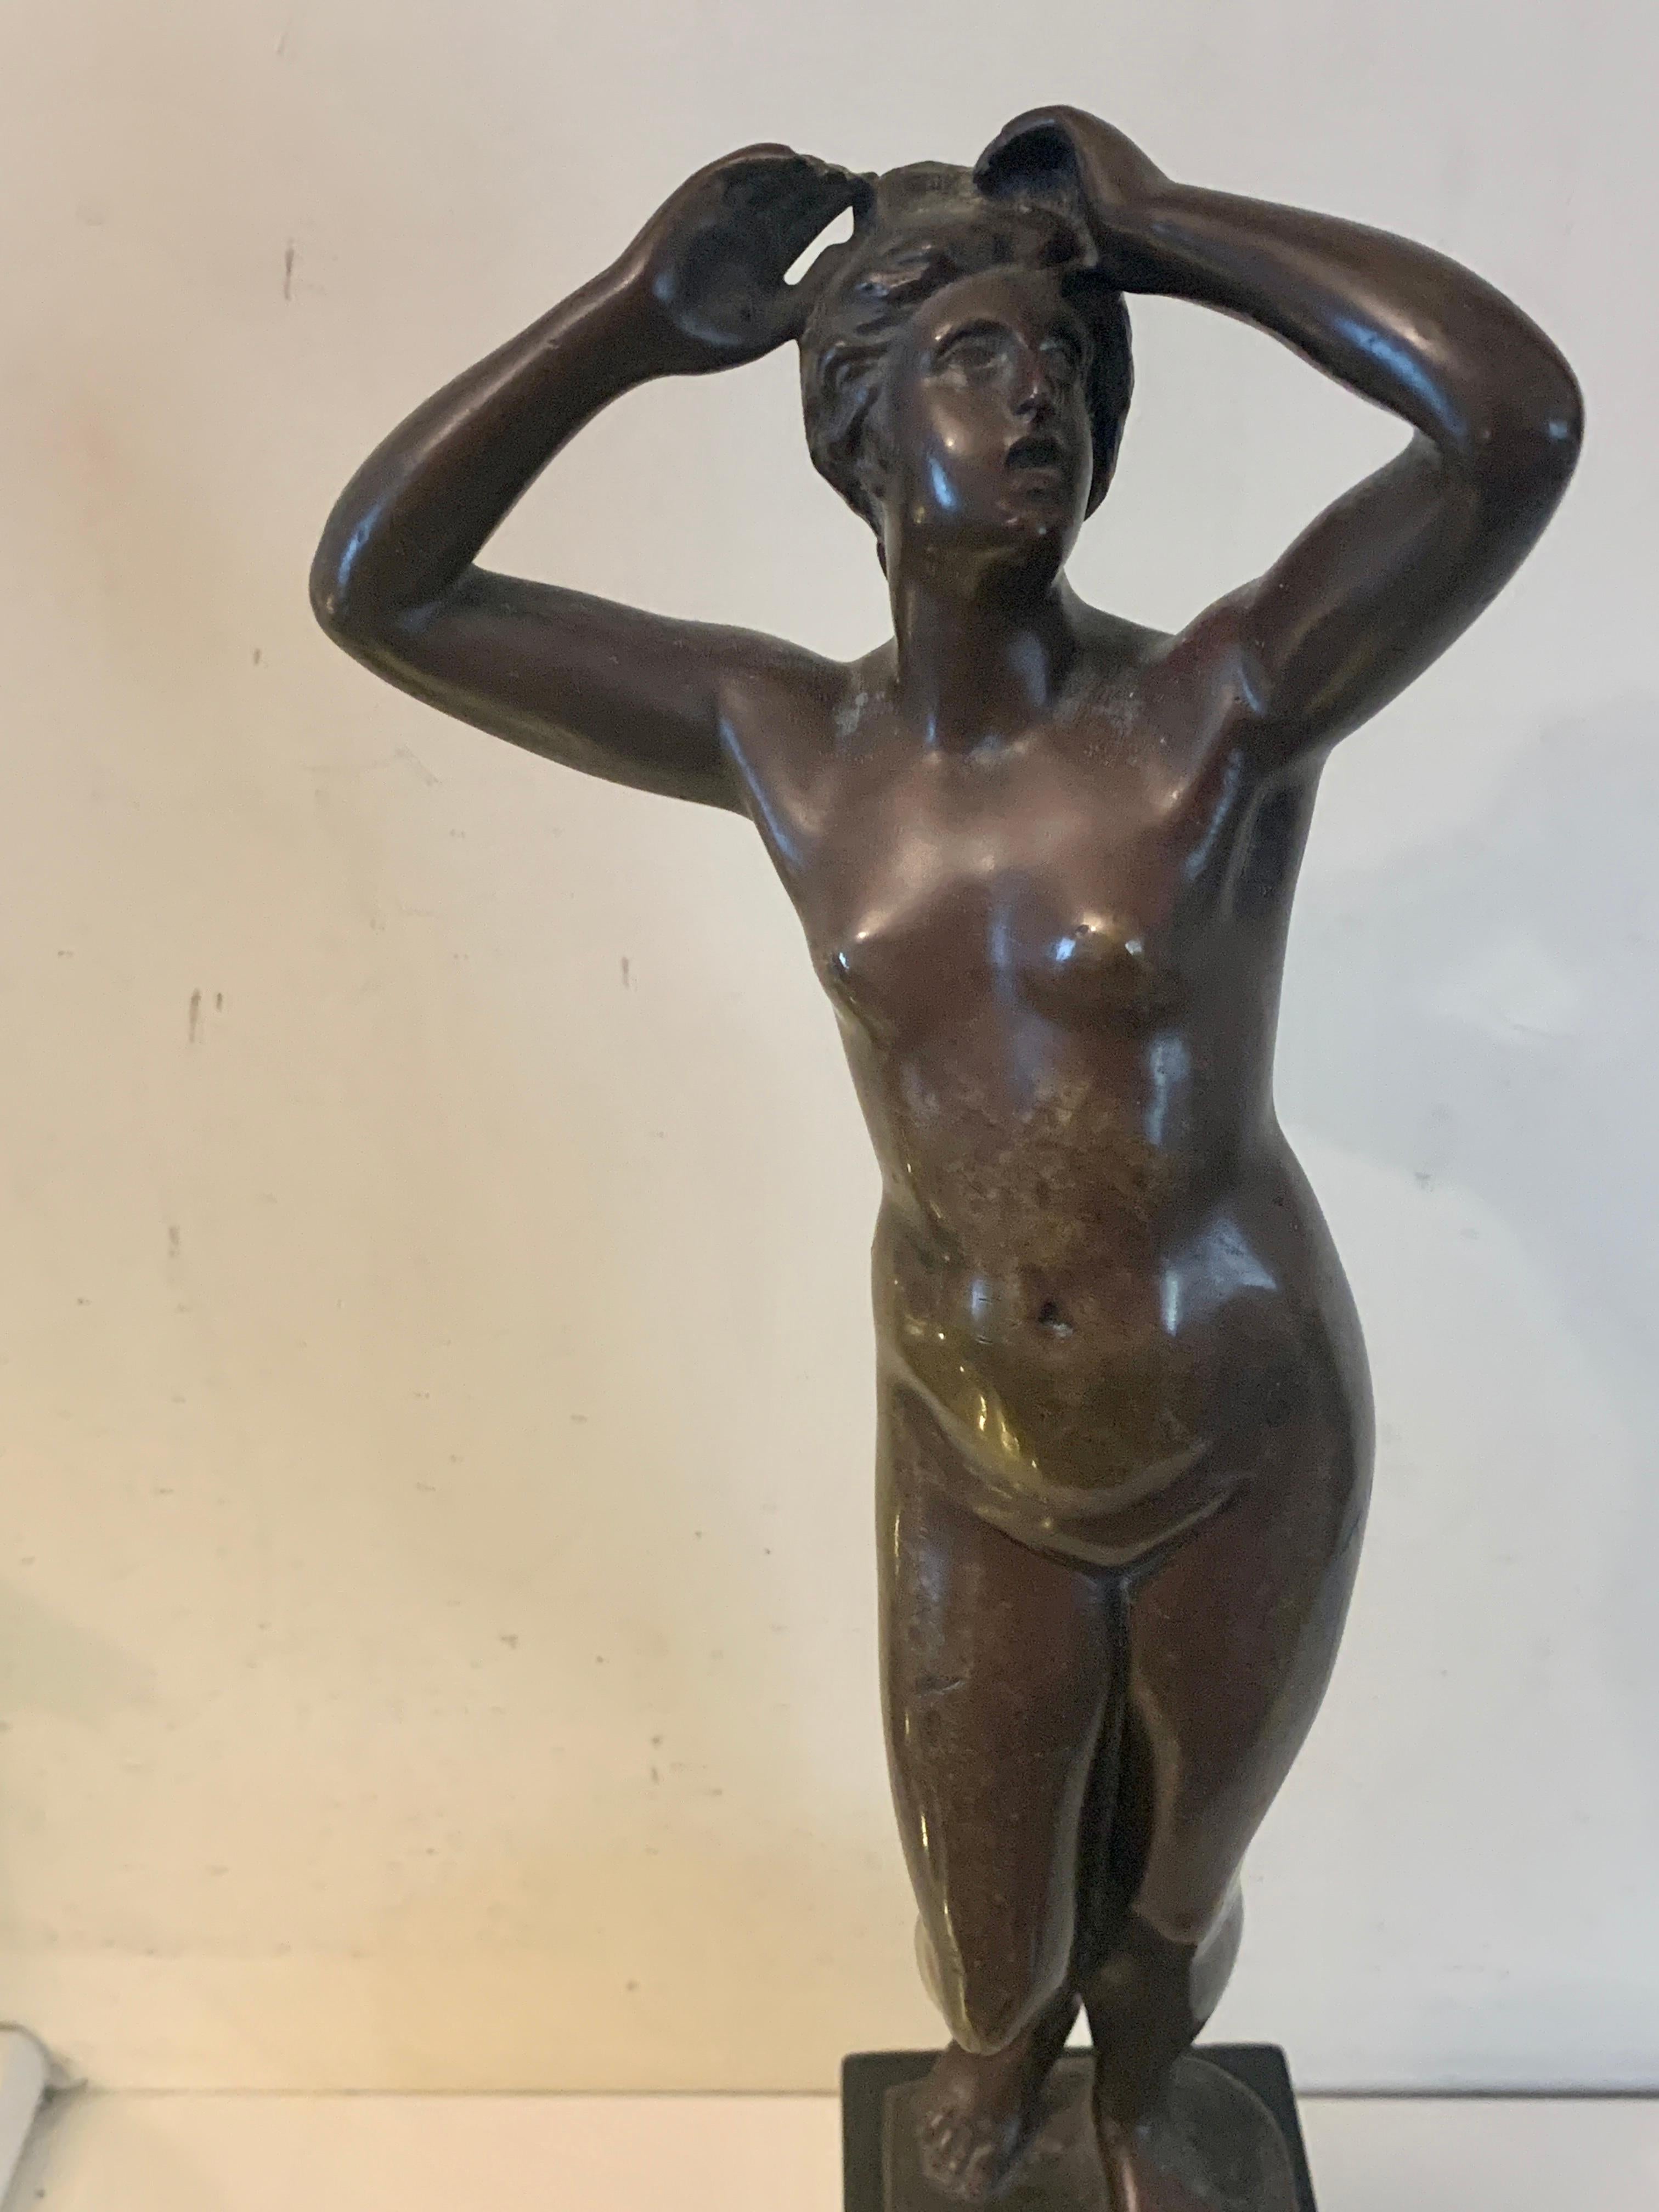 19th century French Bronze of a naked woman standing up. - Sculpture by Cartinet